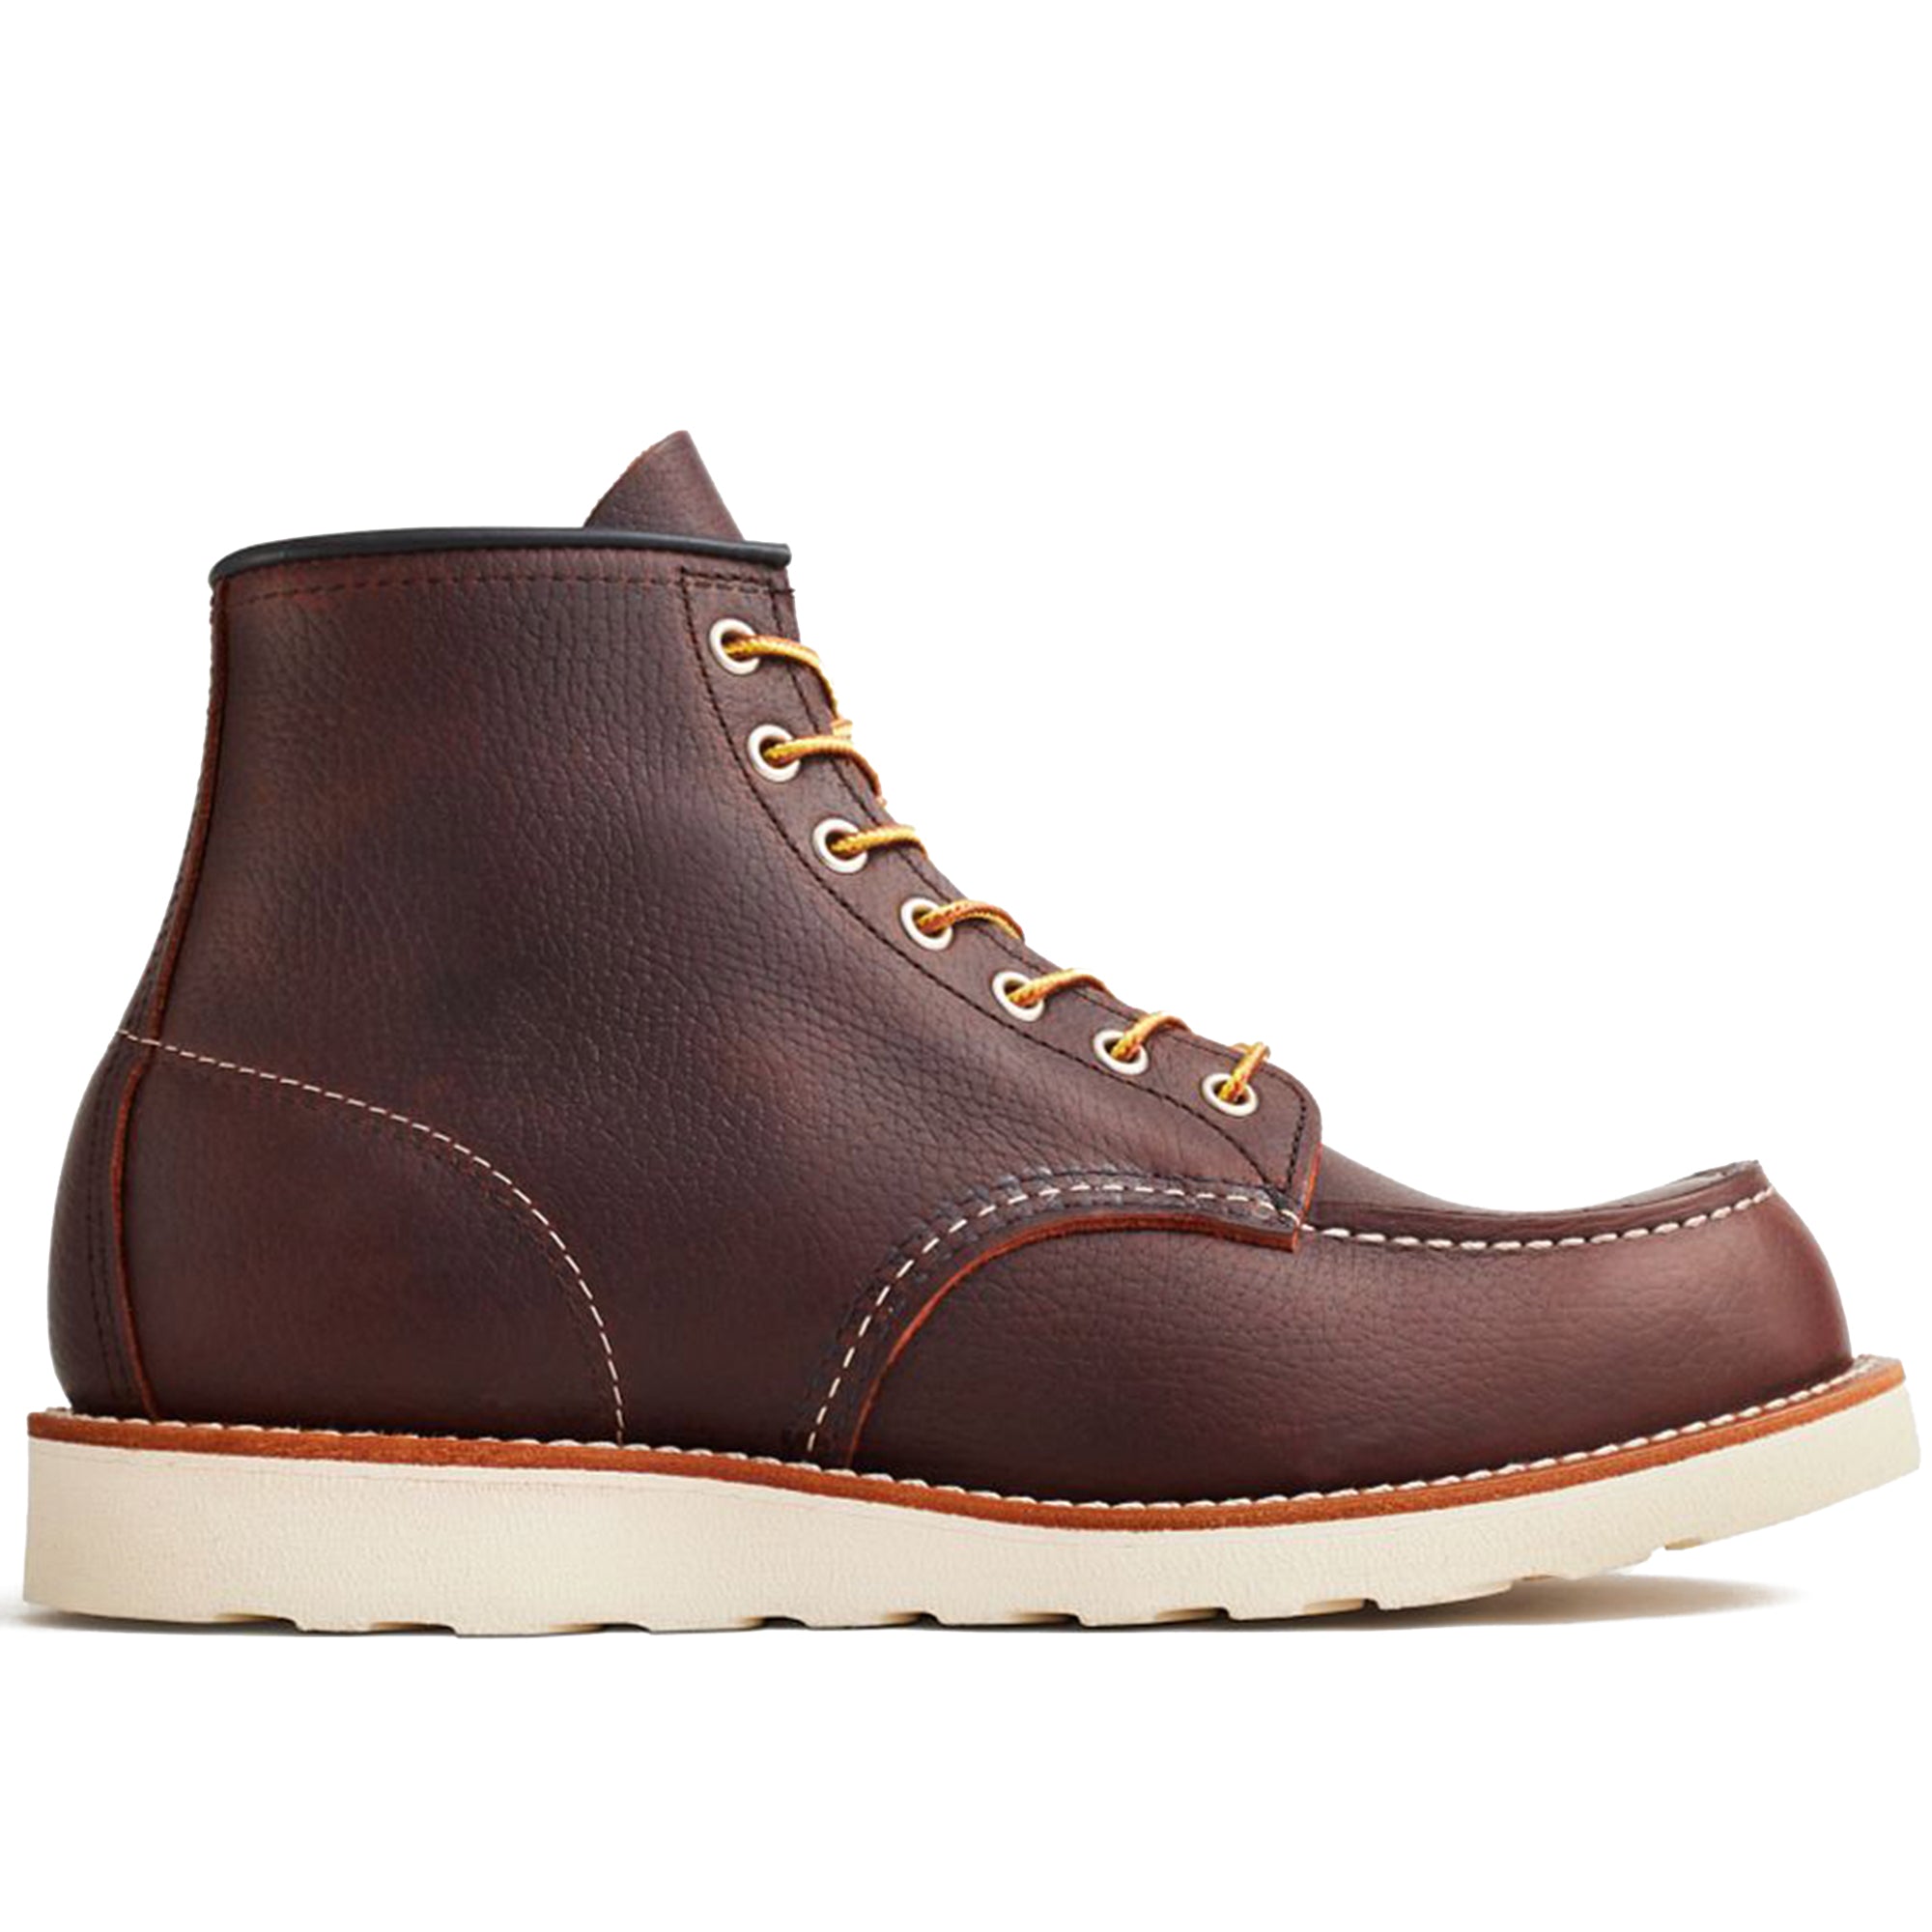 Red Wing 8138  6" Moc Toe Leather Boot - Briar Oil Slick Brown